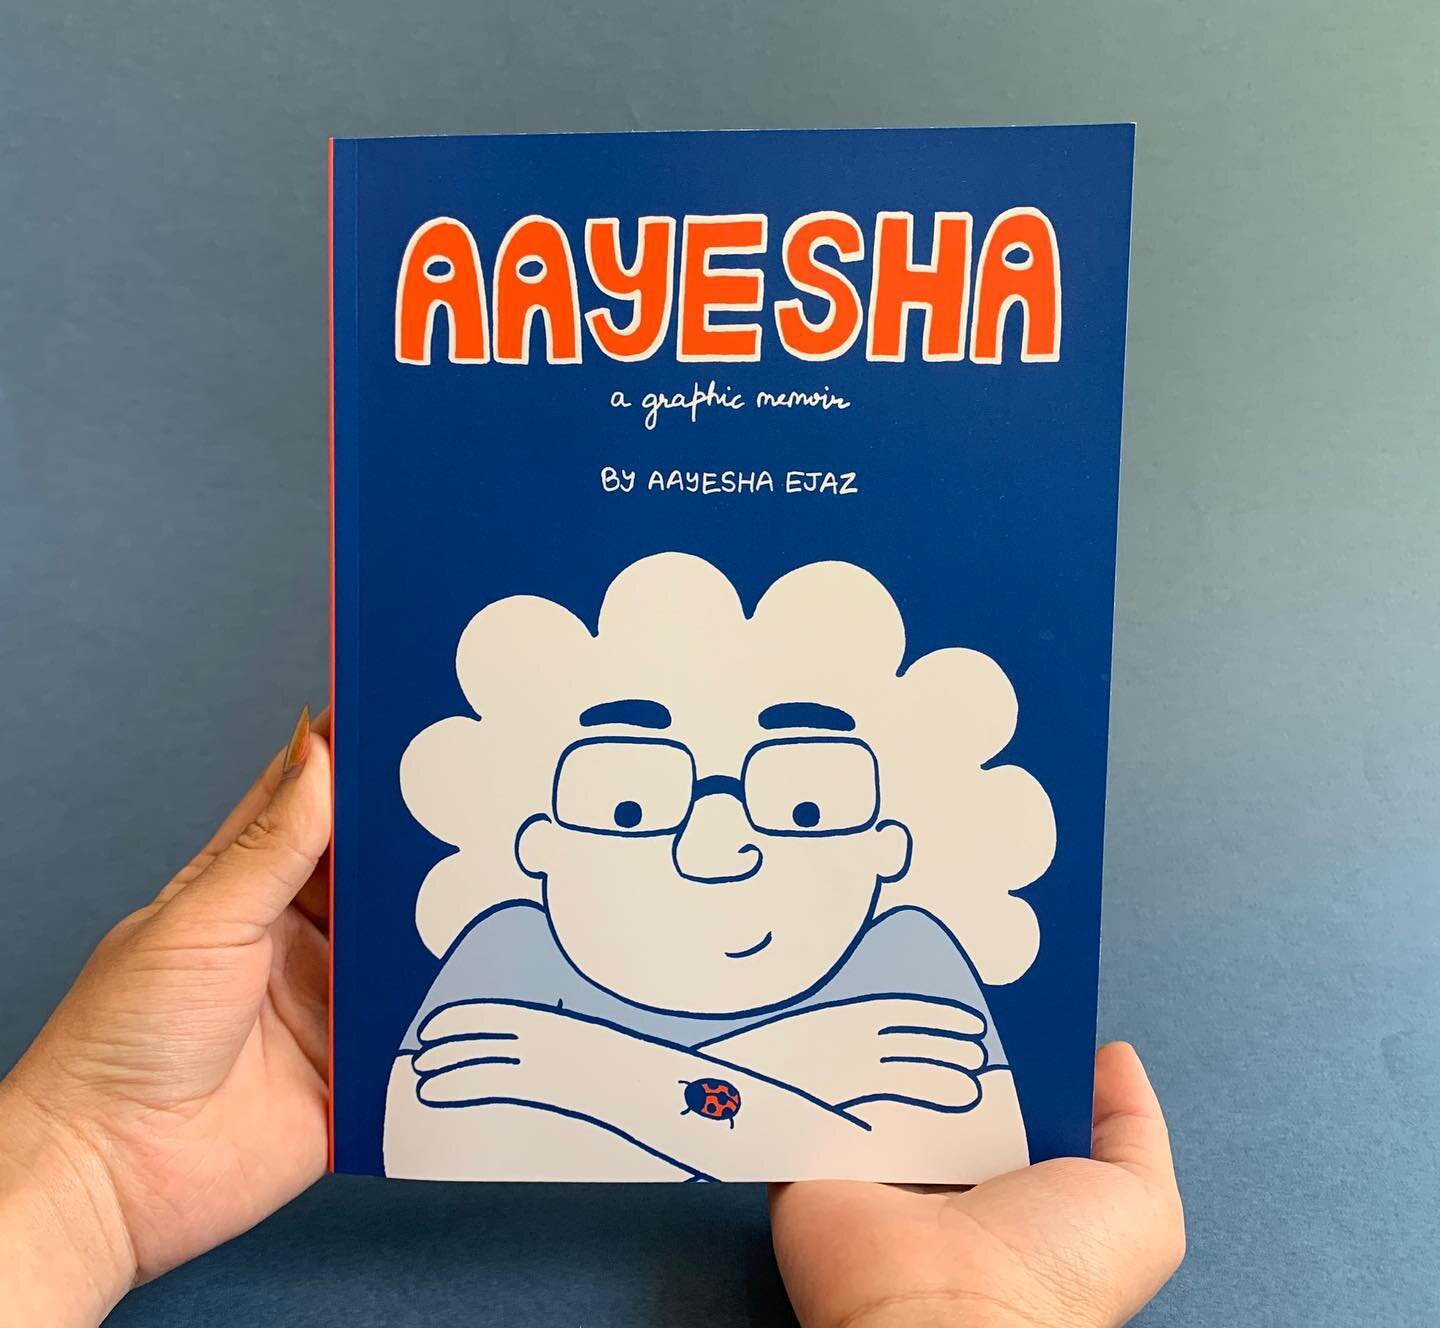 It&rsquo;s 1:30 am here in St. Louis&mdash;that&rsquo;s sort of what working on my thesis project was like. 

&ldquo;Aayesha&rdquo; is a coming-of-age story based on real-life events. It depicts themes of a mother-daughter relationship, familial inte